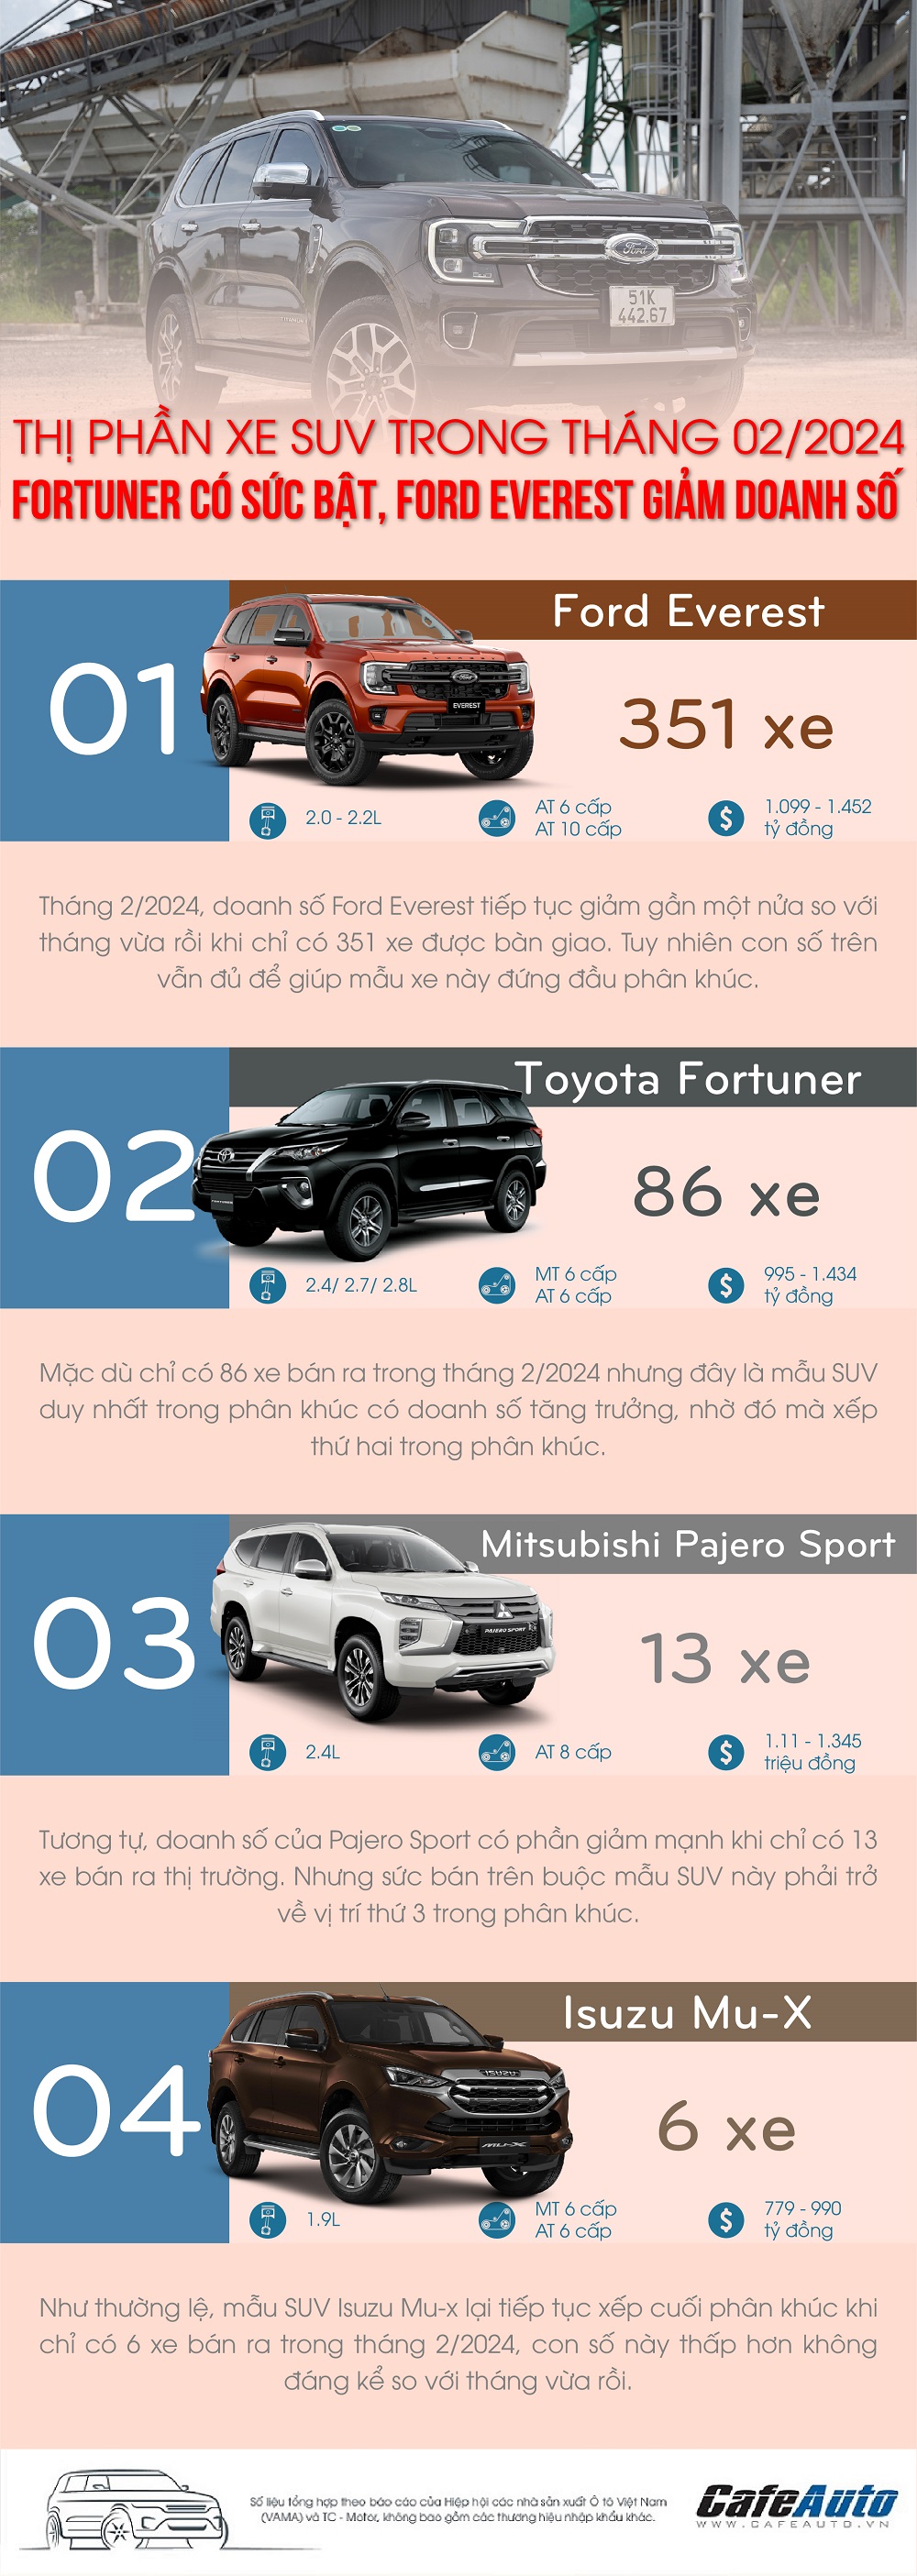 thi-phan-xe-suv-trong-thang-02-2024-toyota-fortuner-co-suc-bat-ford-everest-giam-doanh-so